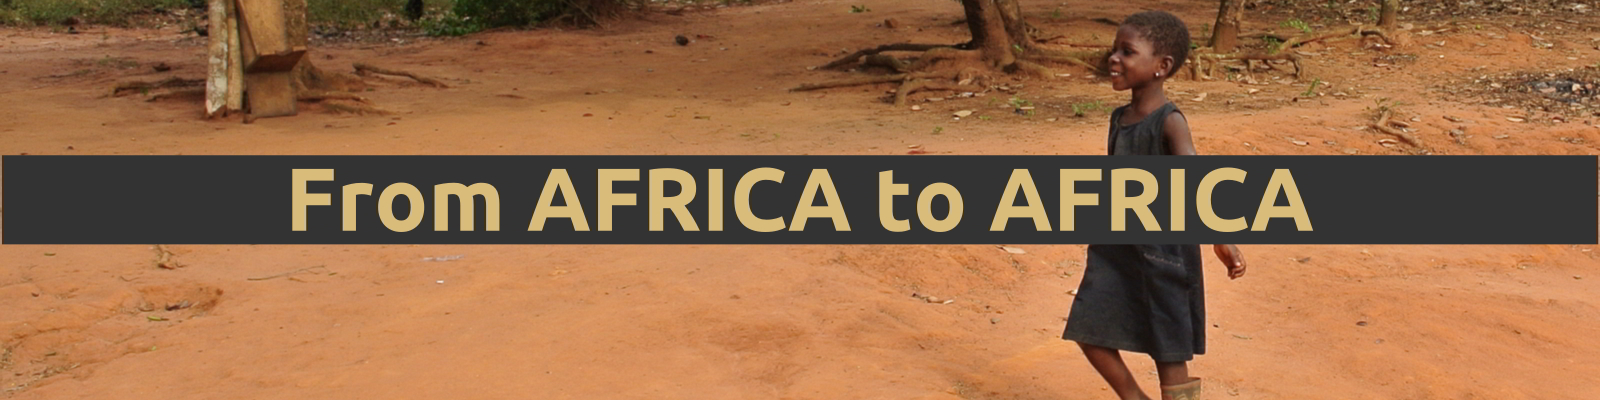 From Africa to Africa - OFIE.ORG